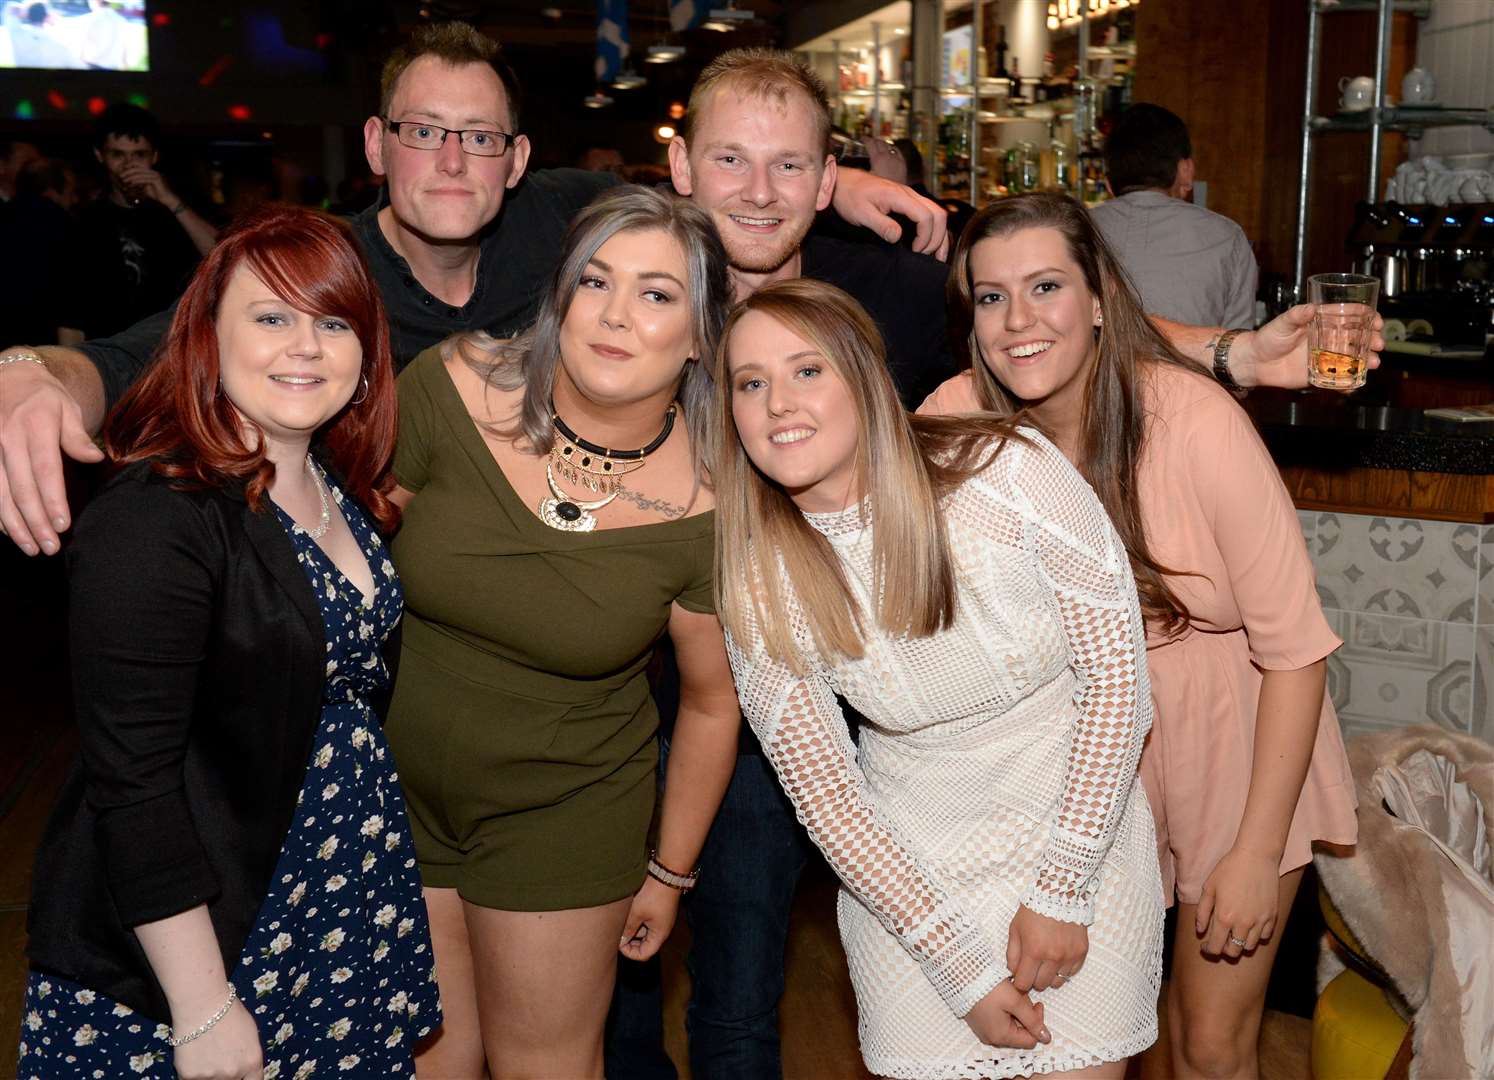 Cherrie Greggan (in white) with friends on her 24th birthday celebration. Picture: Gary Anthony.